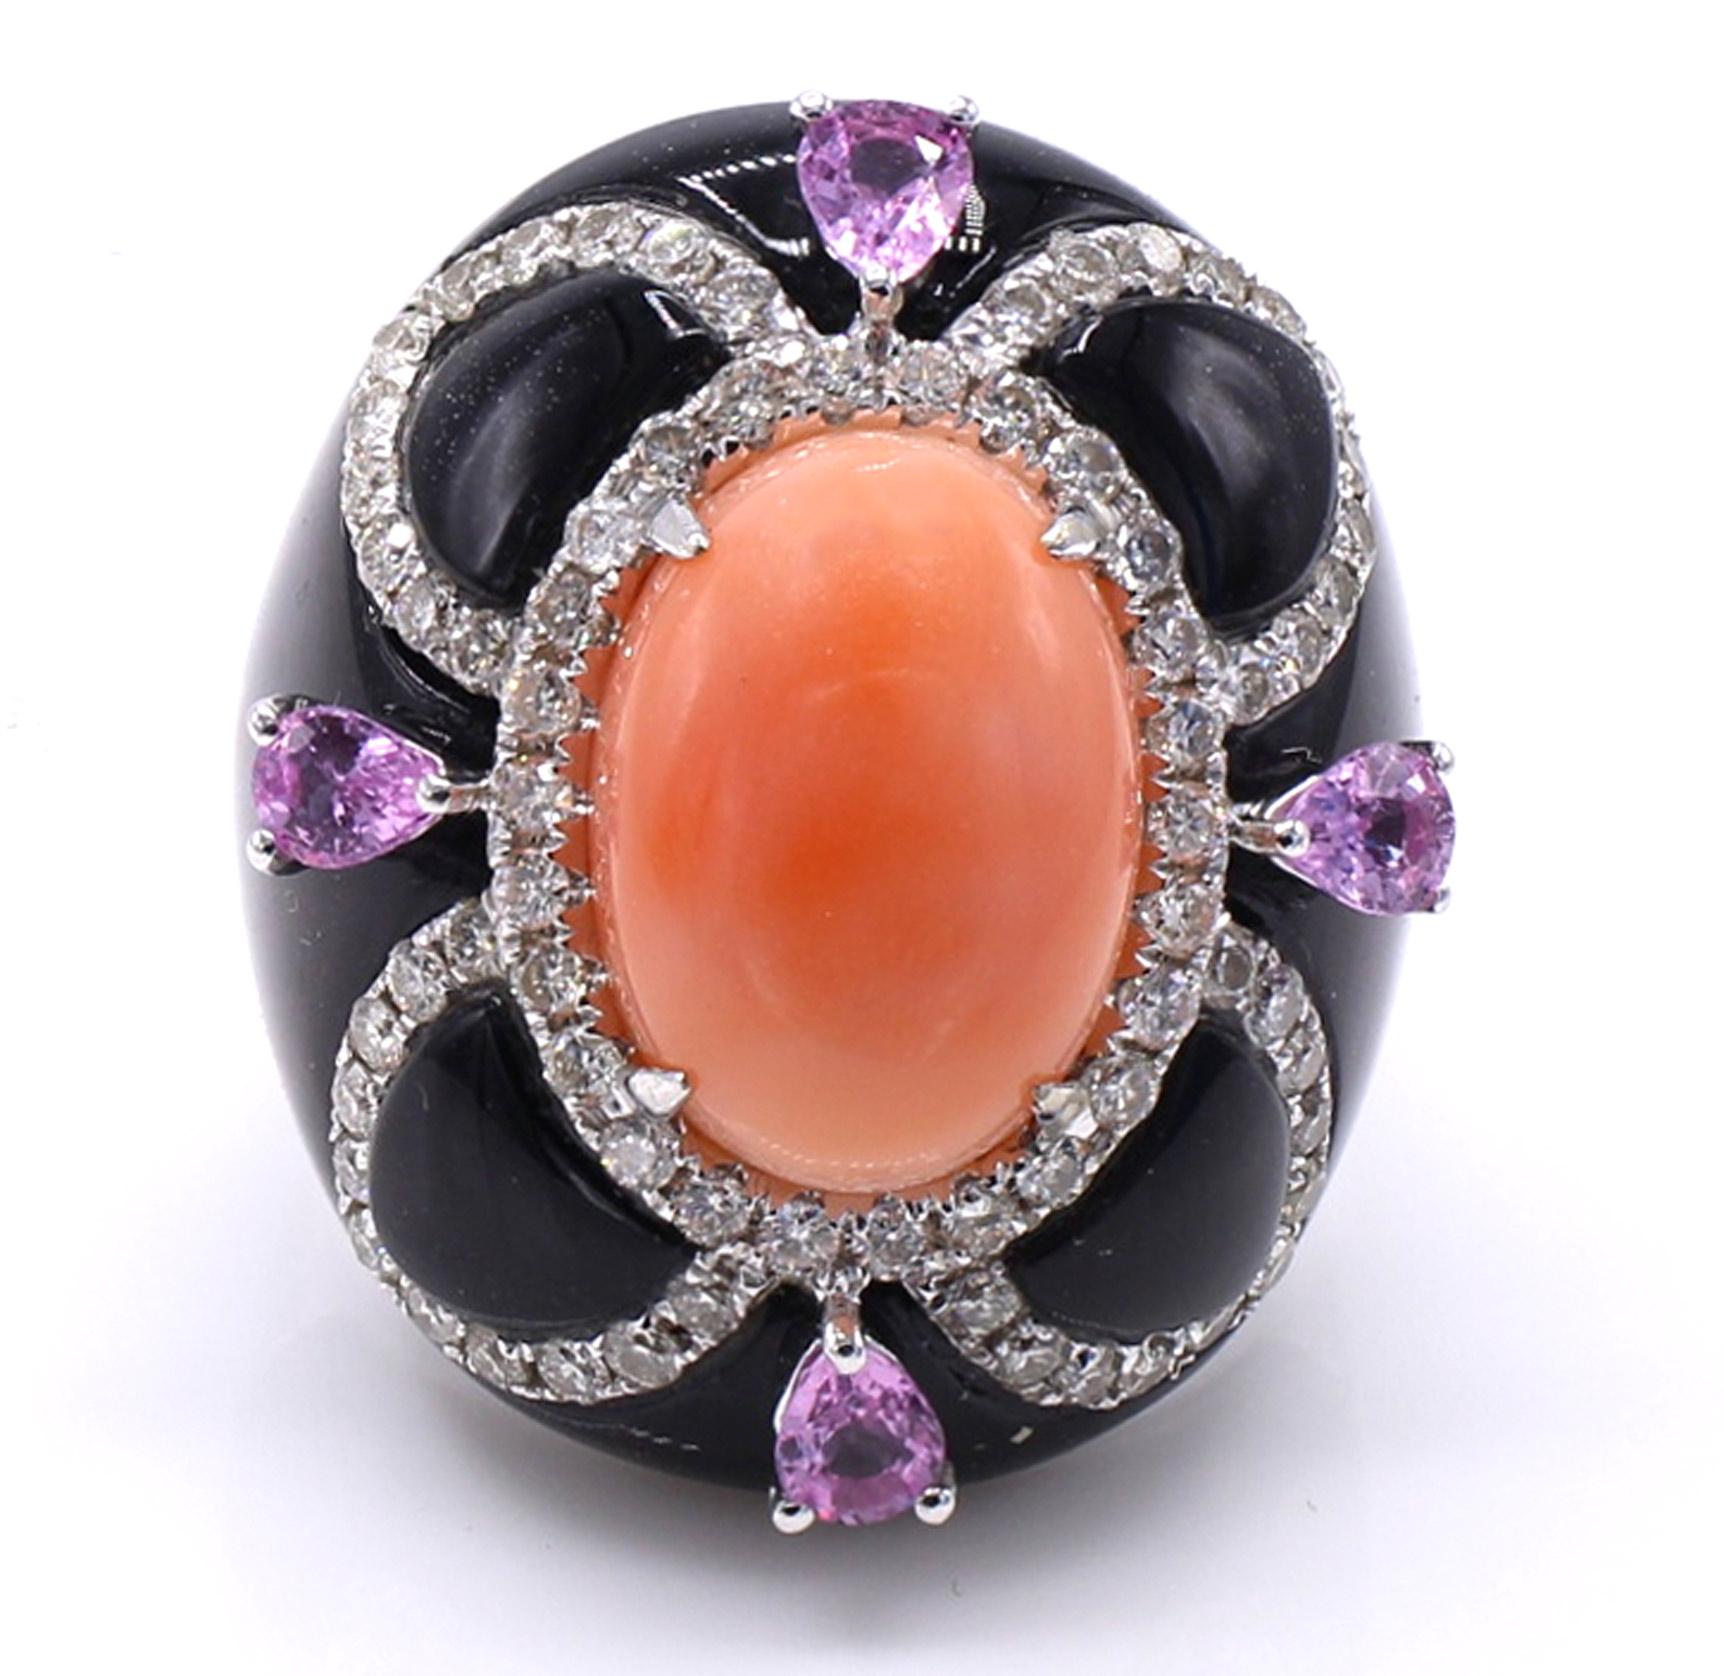 Beautifully designed and masterfully handcrafted this fashionable, chic and colorful ring is a piece of art on the finger. Centrally set with a light pink oval coral cabochon, embellished by a ring of bright white and sparkly round brilliant cut